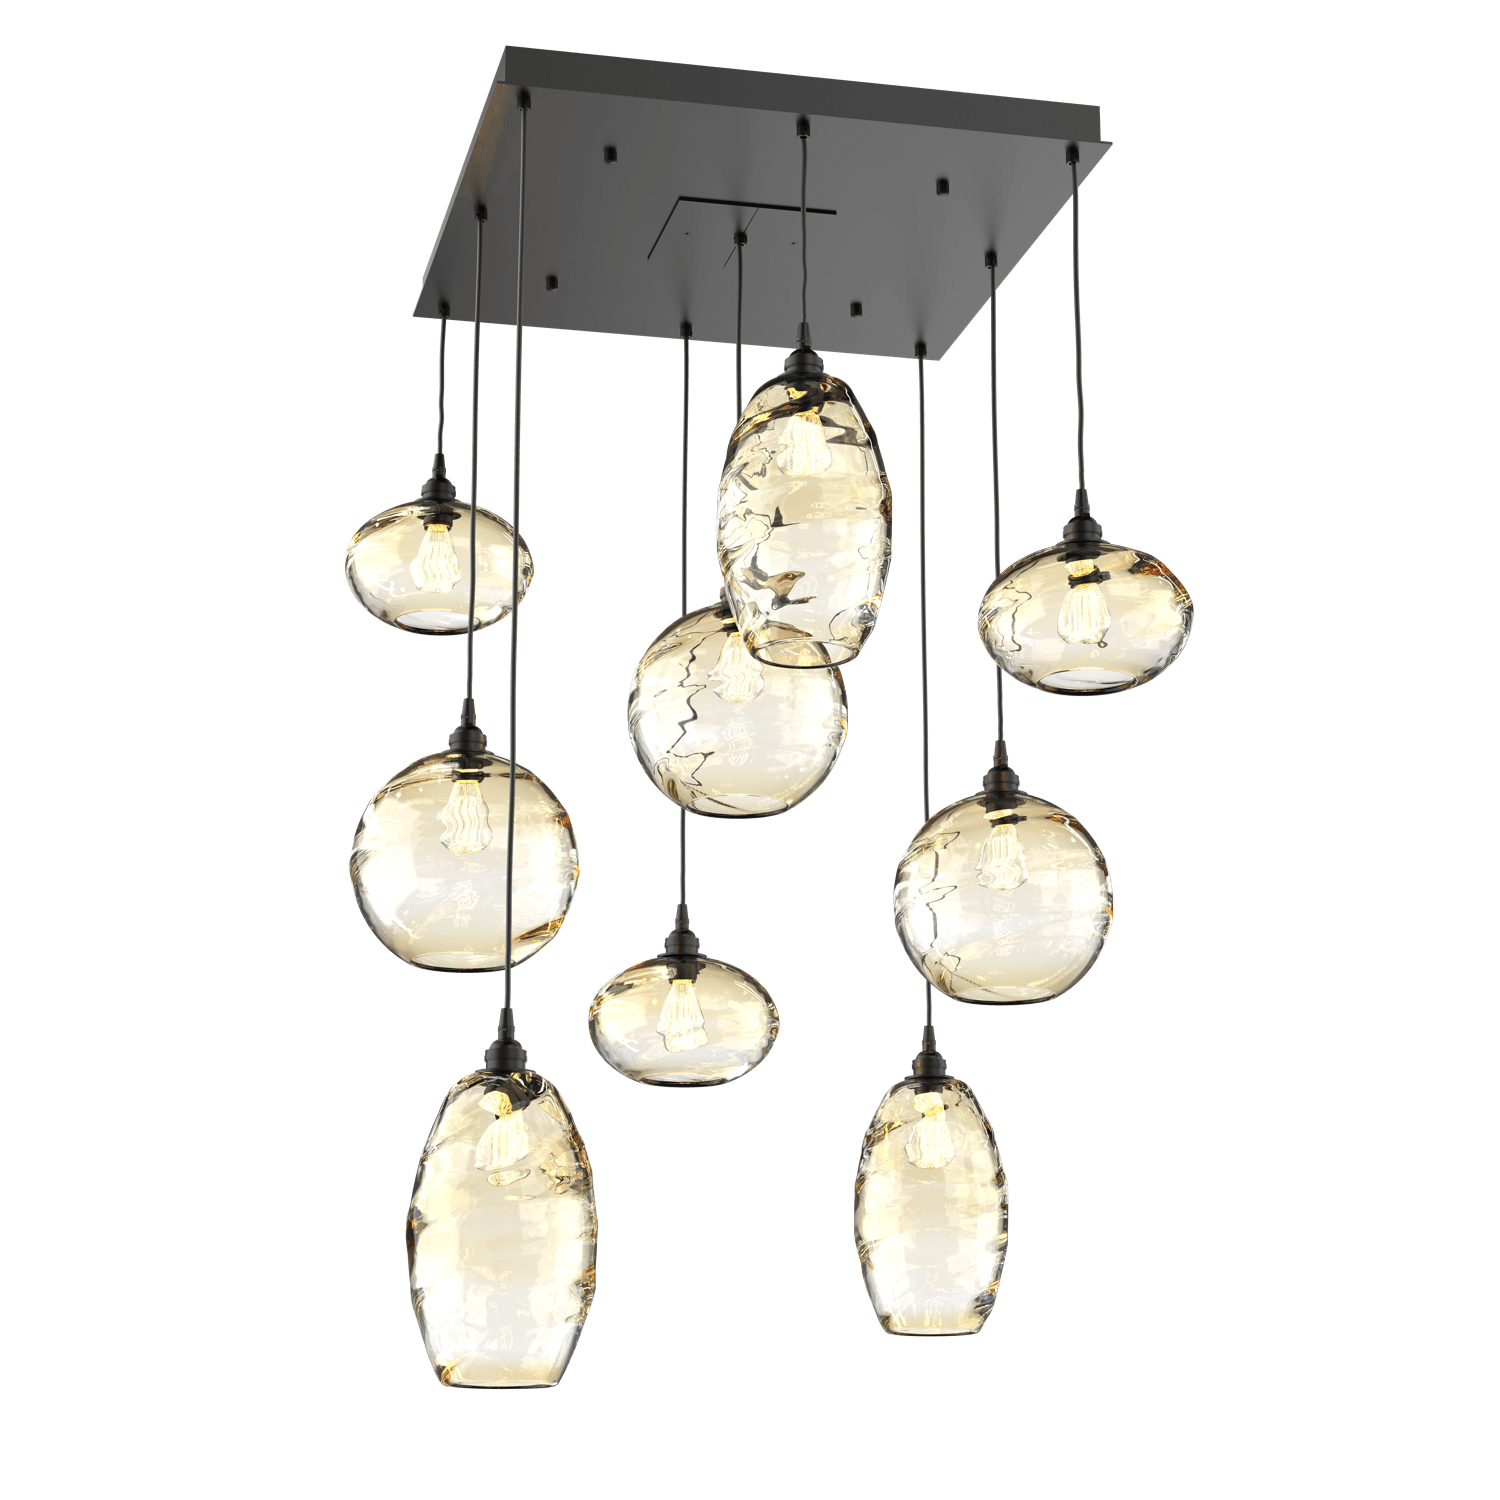 CHB0048-09-MB-OA-Hammerton-Studio-Optic-Blown-Glass-Misto-9-light-square-pendant-chandelier-with-matte-black-finish-and-optic-amber-blown-glass-shades-and-incandescent-lamping